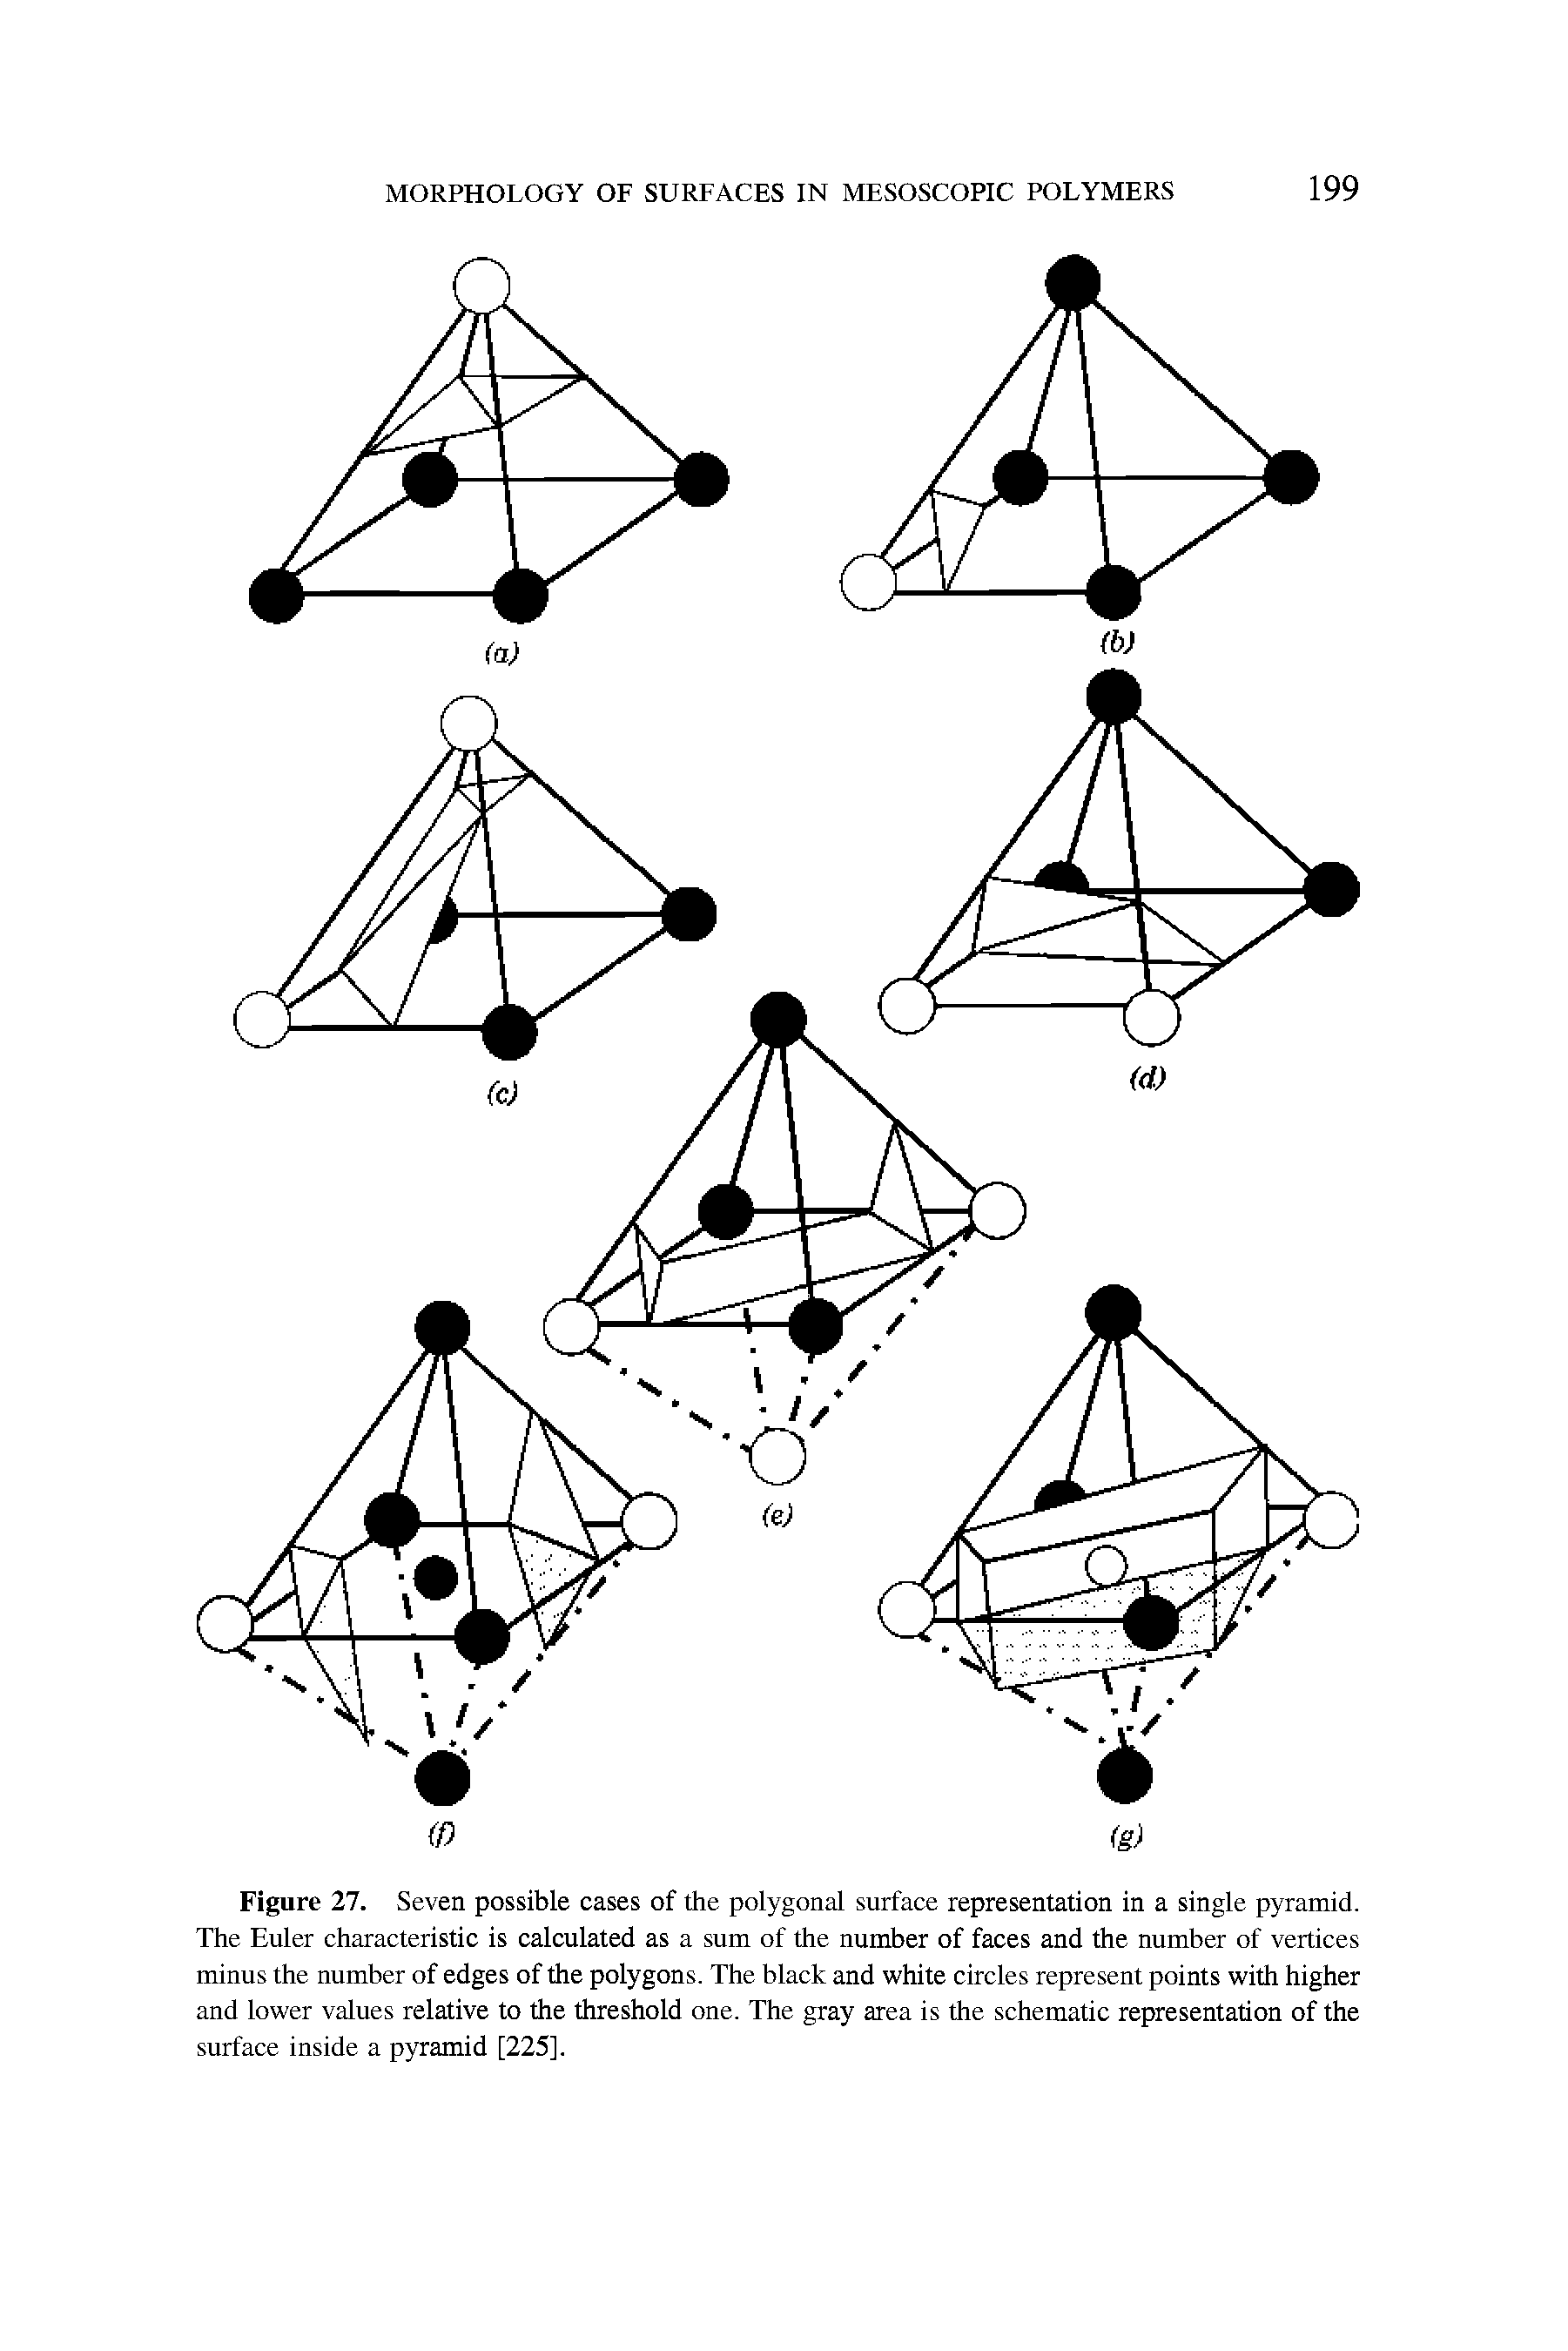 Figure 27. Seven possible cases of the polygonal surface representation in a single pyramid. The Euler characteristic is calculated as a sum of the number of faces and the number of vertices minus the number of edges of the polygons. The black and white circles represent points with higher and lower values relative to the threshold one. The gray area is the schematic representation of the surface inside a pyramid [225].